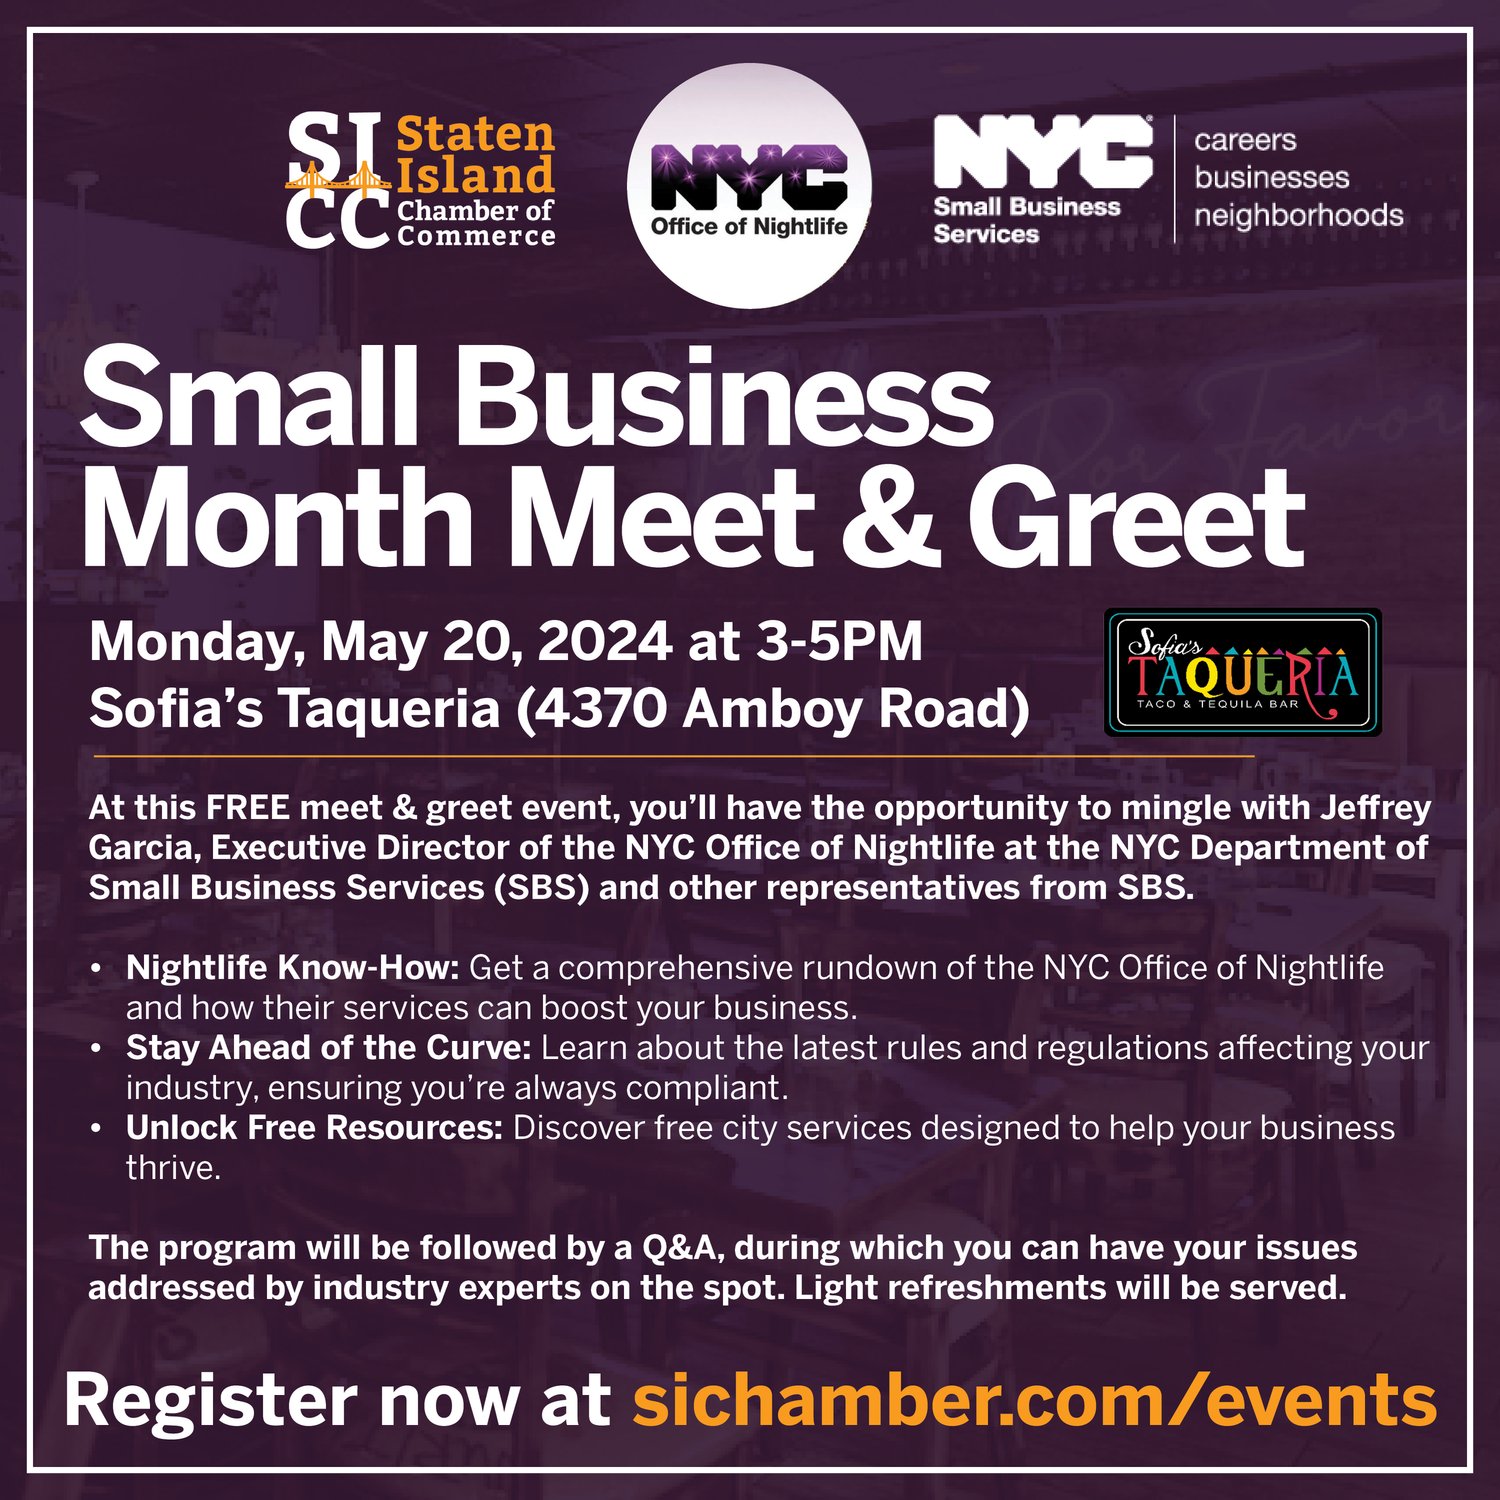 graphic promoting Small Business Month Meet & Greet with Staten Island Chamber of Commerce, NYC Office of Nightlife, and NYC Department of Small Business Services logos